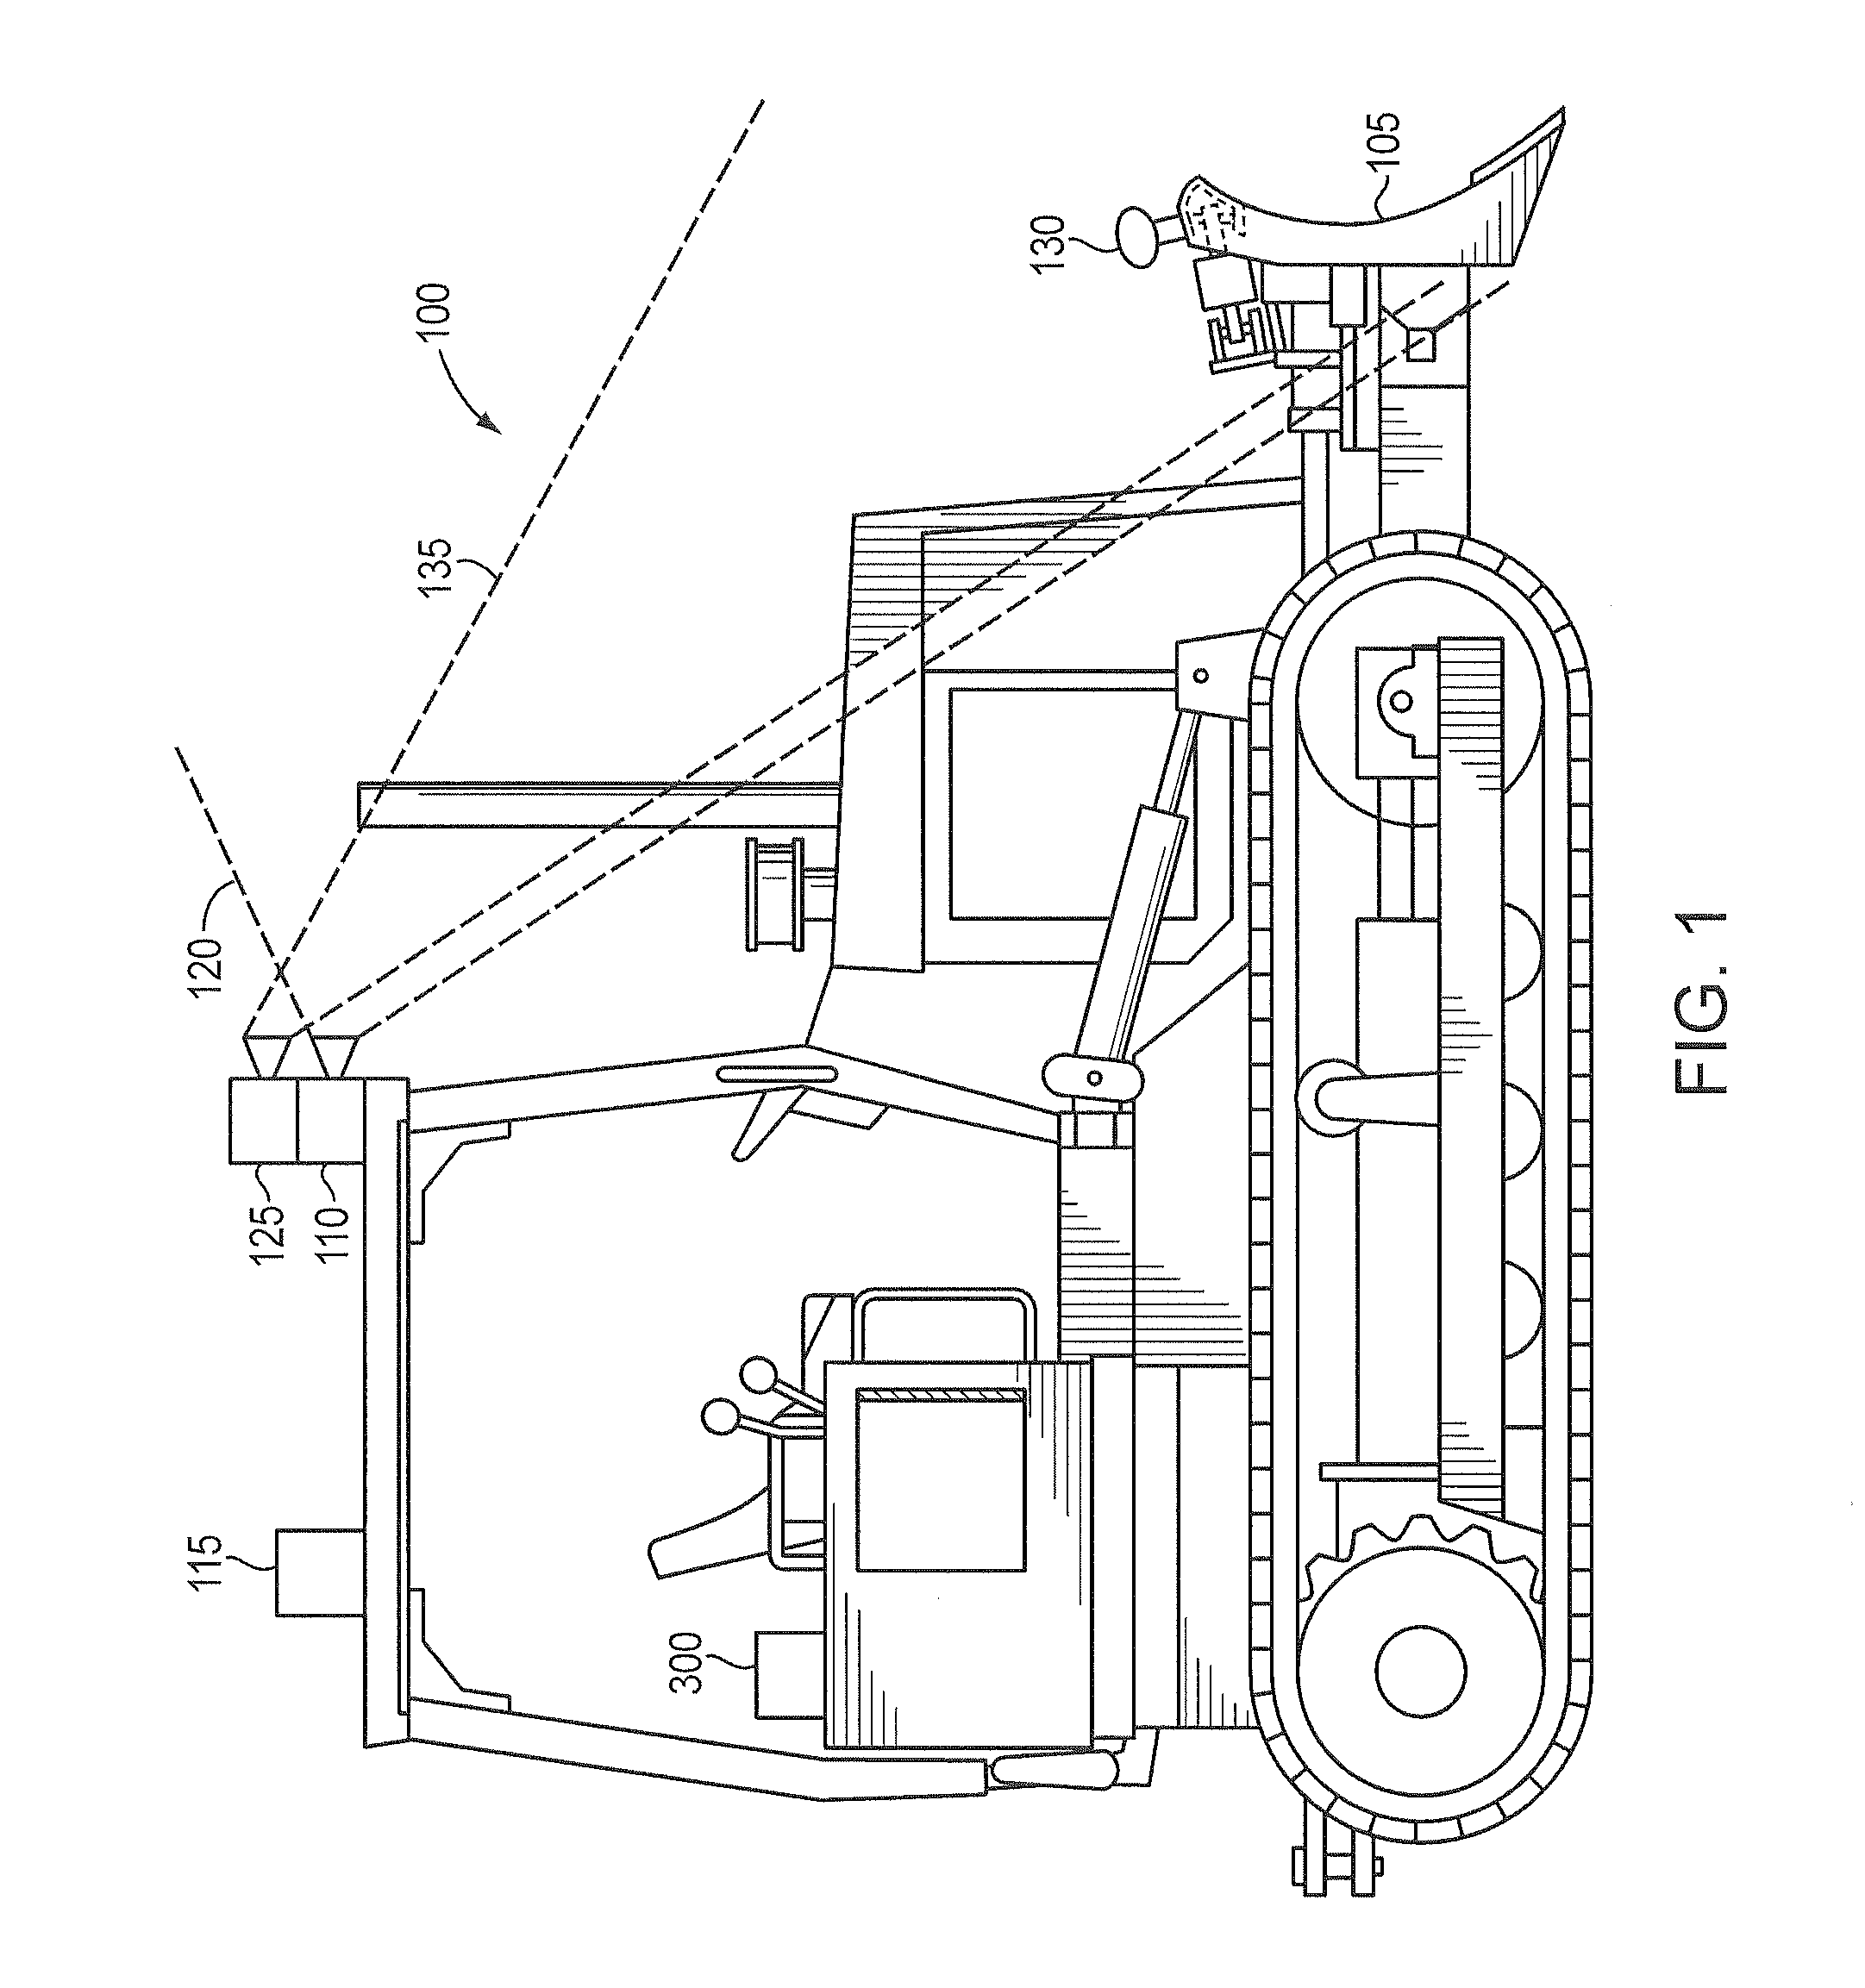 System and method for heavy equipment navigation and working edge positioning using an image acquisition device that provides distance information